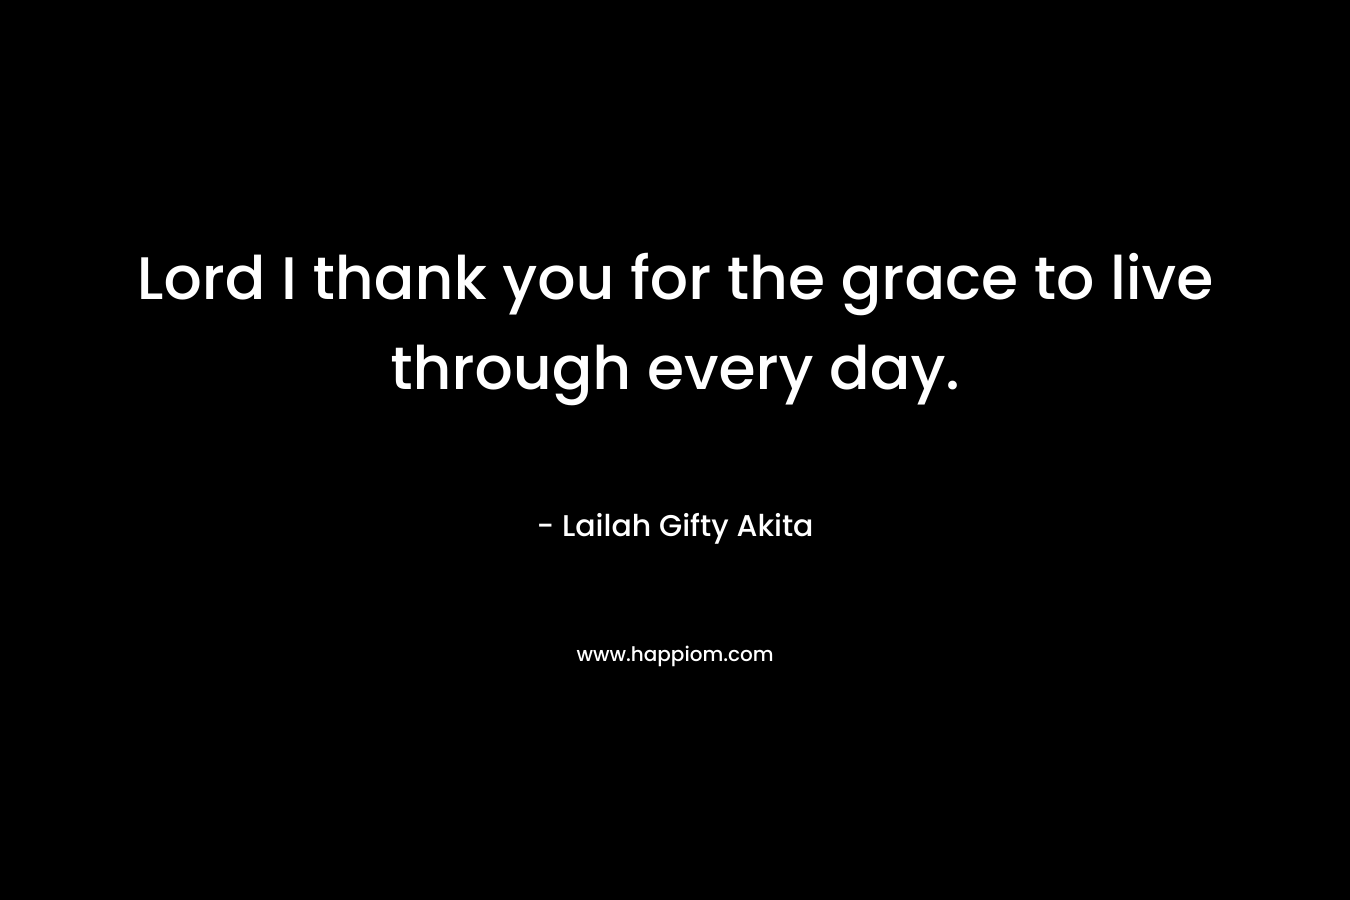 Lord I thank you for the grace to live through every day.